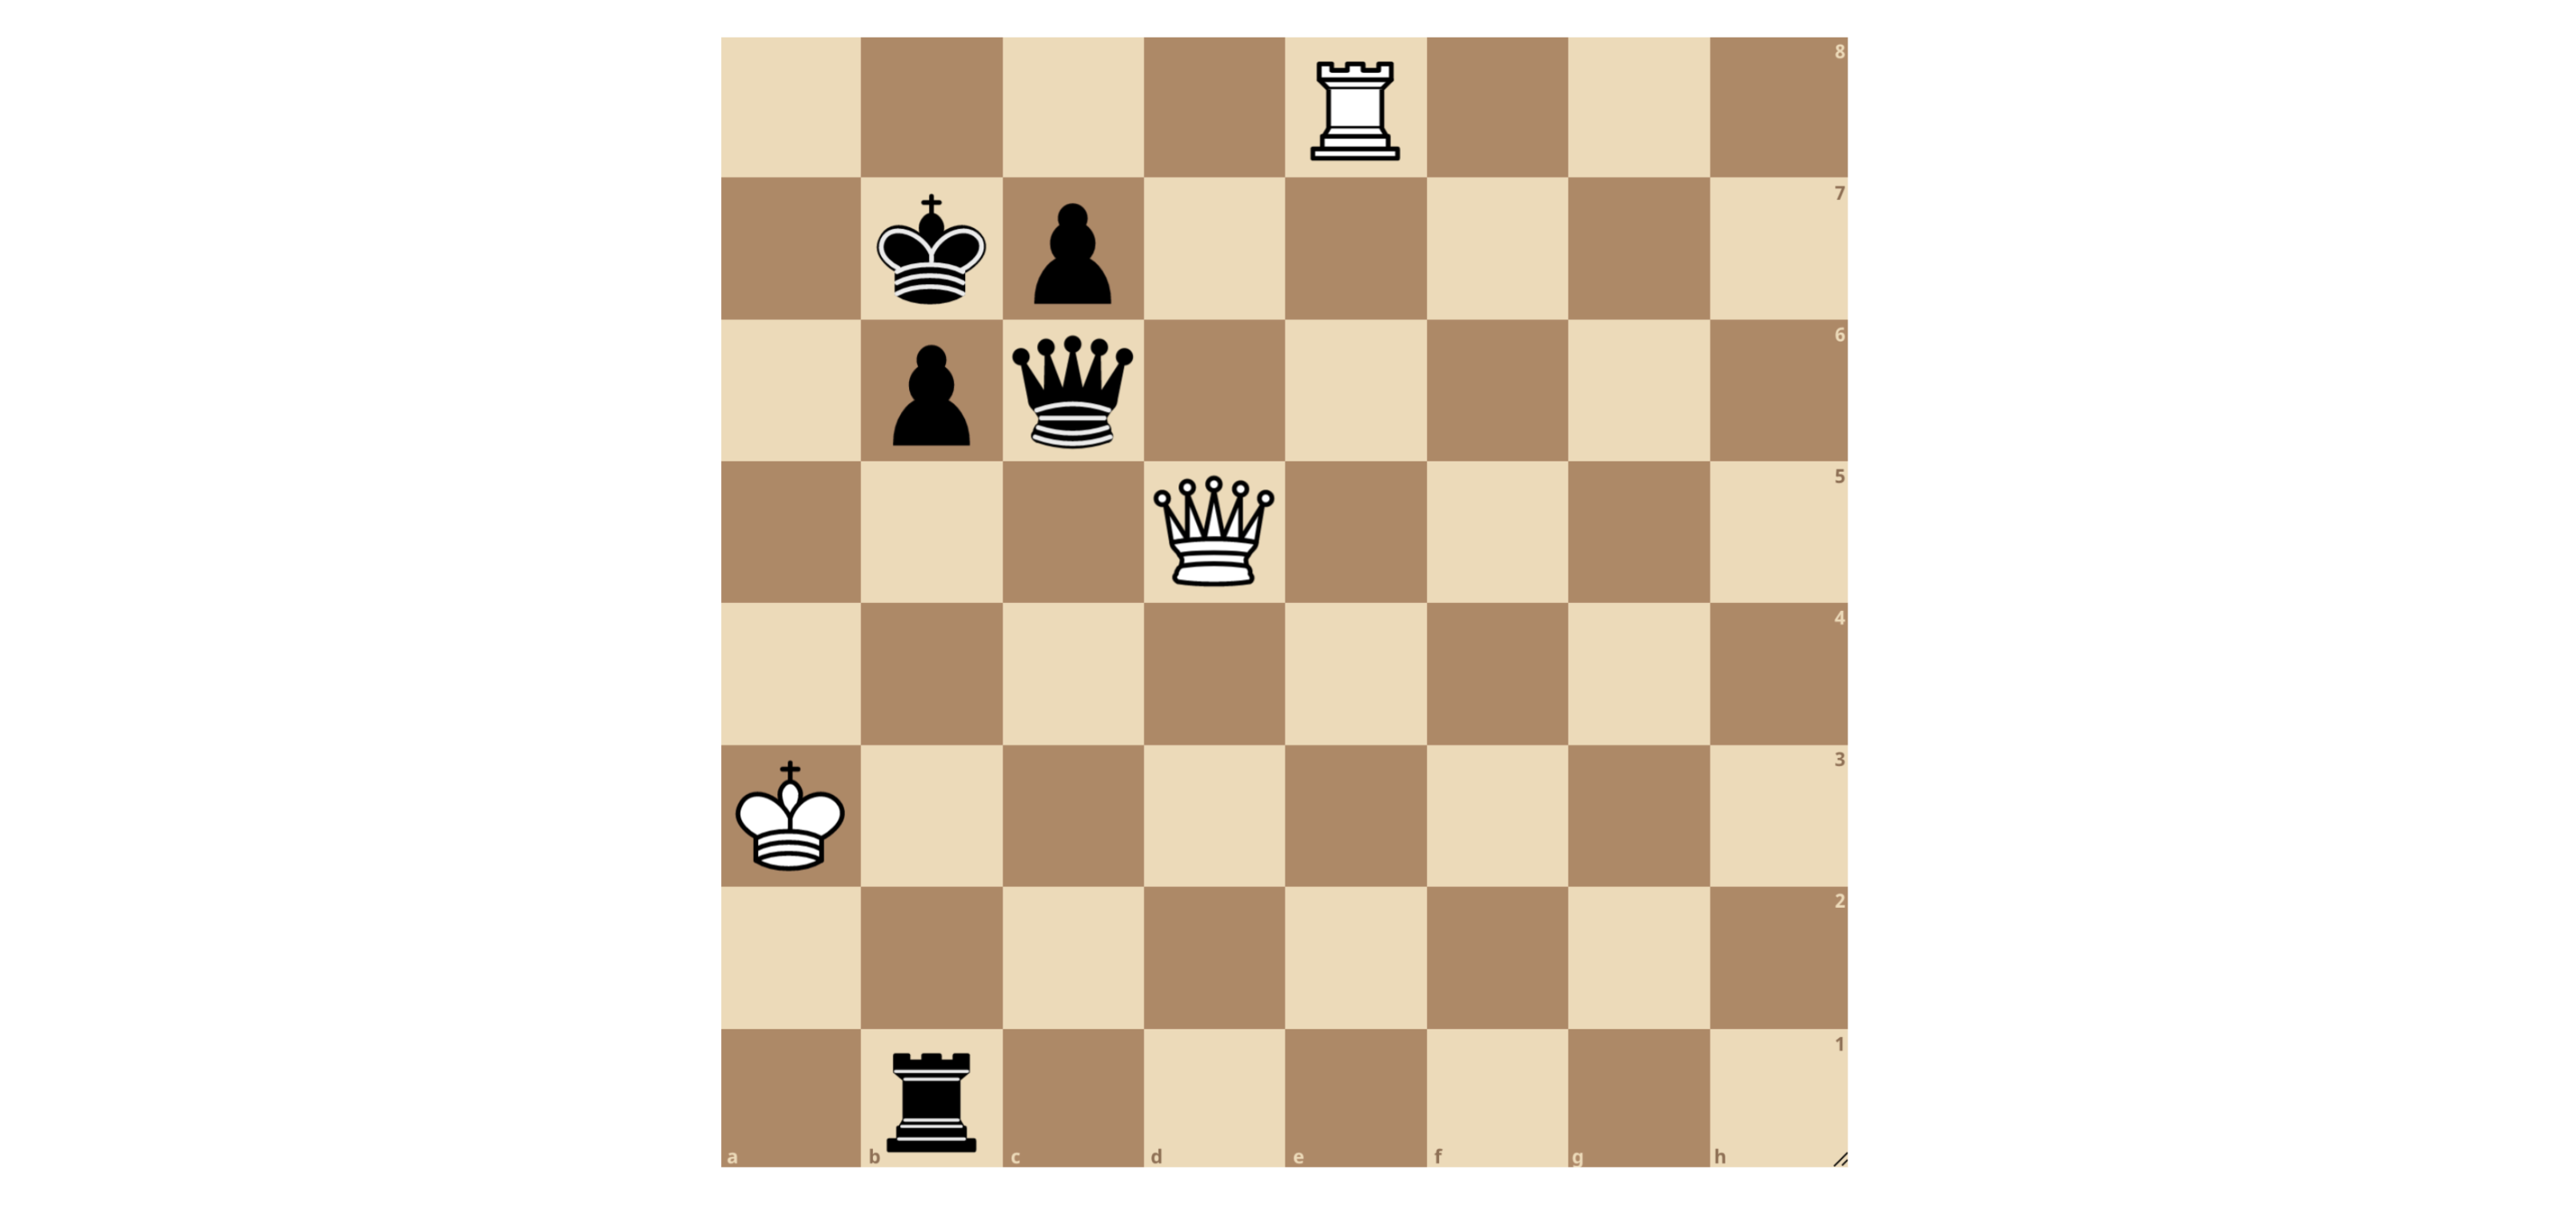 Figure 2. White to move. From this image, many basic piece relationships are apparent with only 8 pieces left on the board. Importantly, the black king is defending the black queen. The black queen is also being attacked by the white queen, and is attacking the white queen. White’s queen is undefended, a state sometimes referred to as hanging. These relationships reveal the opportunity for a tactic. White can simultaneously move his rook to attack black’s king (danger levels) and take advantage of the defensive connection between the black king and queen with the move rook to b8. This forces black to move his king, removing the defense of his queen. In this position, black’s queen can be freely captured by white’s queen. Due to the mobility advantages of a queen over a rook, this is a favorable move sequence for white.